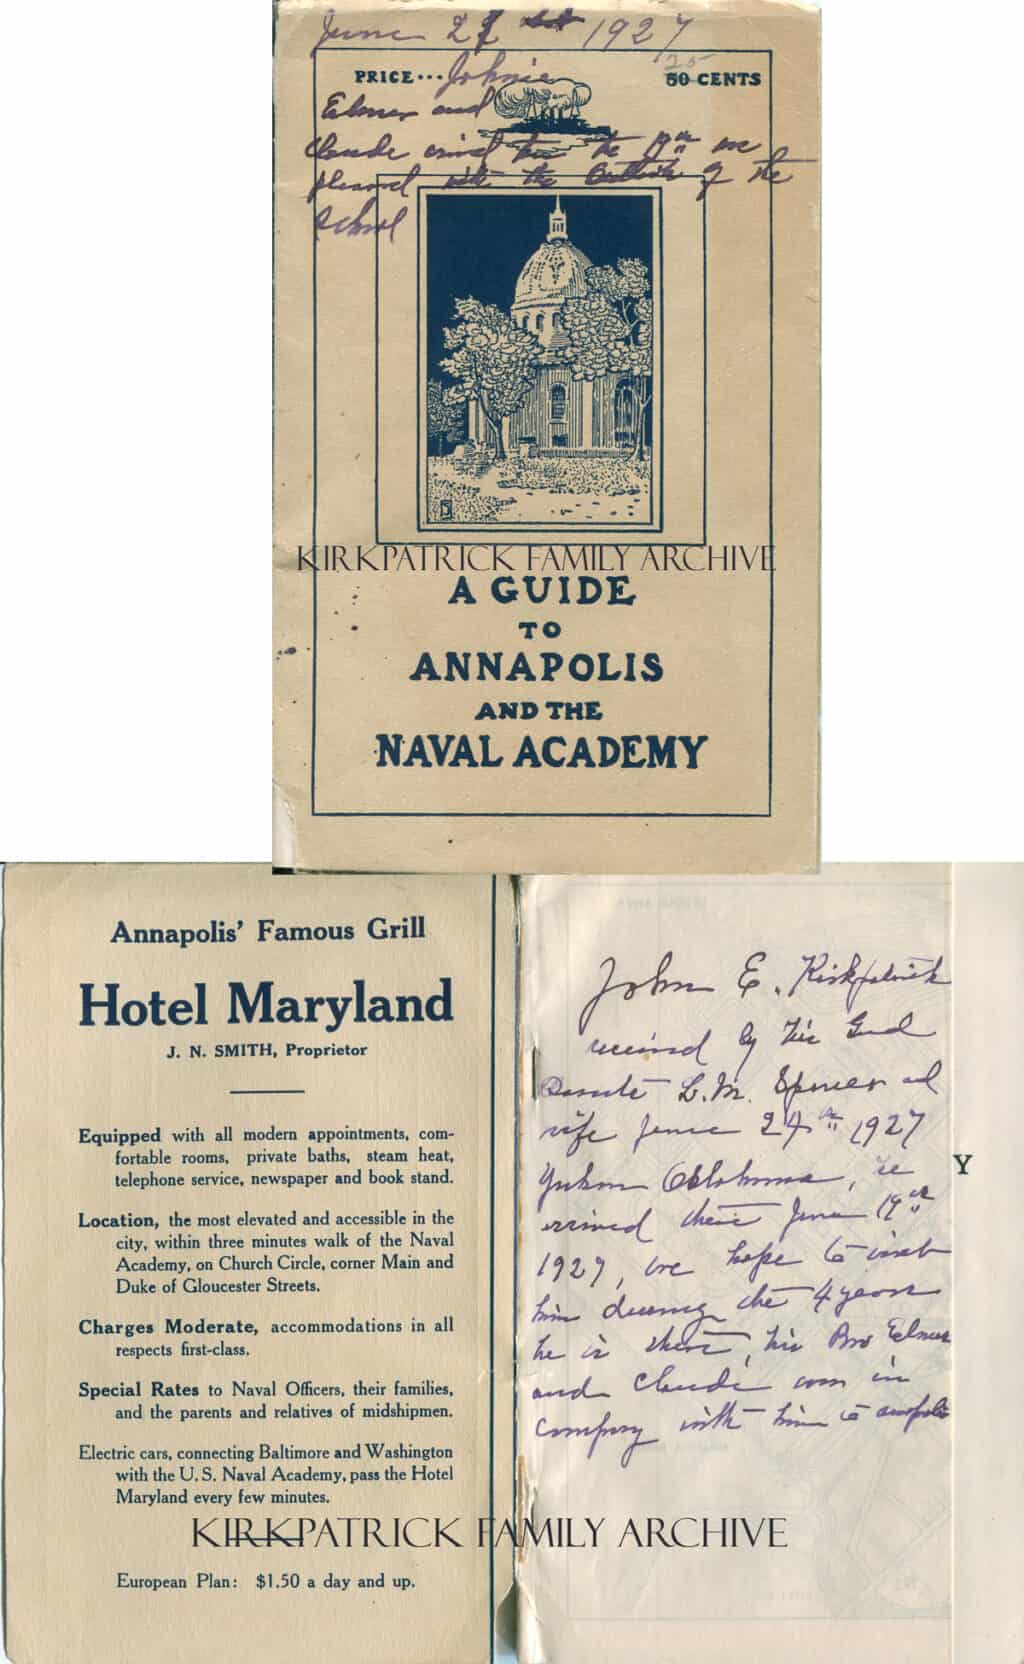 Guide to Annapolis and the Naval Academy book. On the cover is the date June 21/22